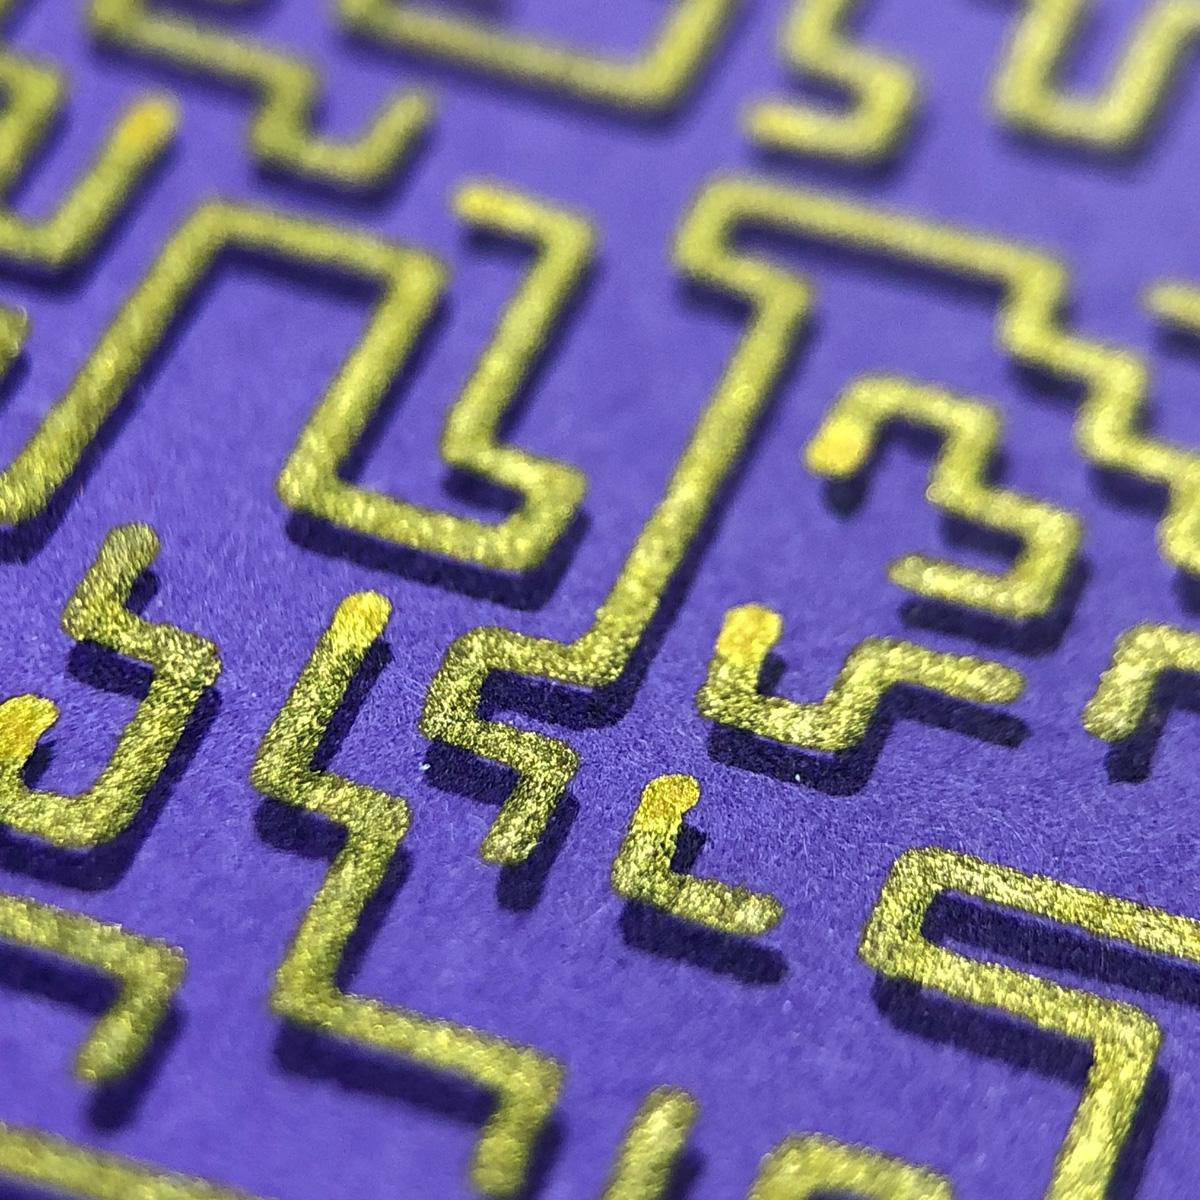 A close view of gold lines on purple paper. The lines move with random 90 degree rotations, but do not overlap. Some are short, others long enough to leave the frame of the image